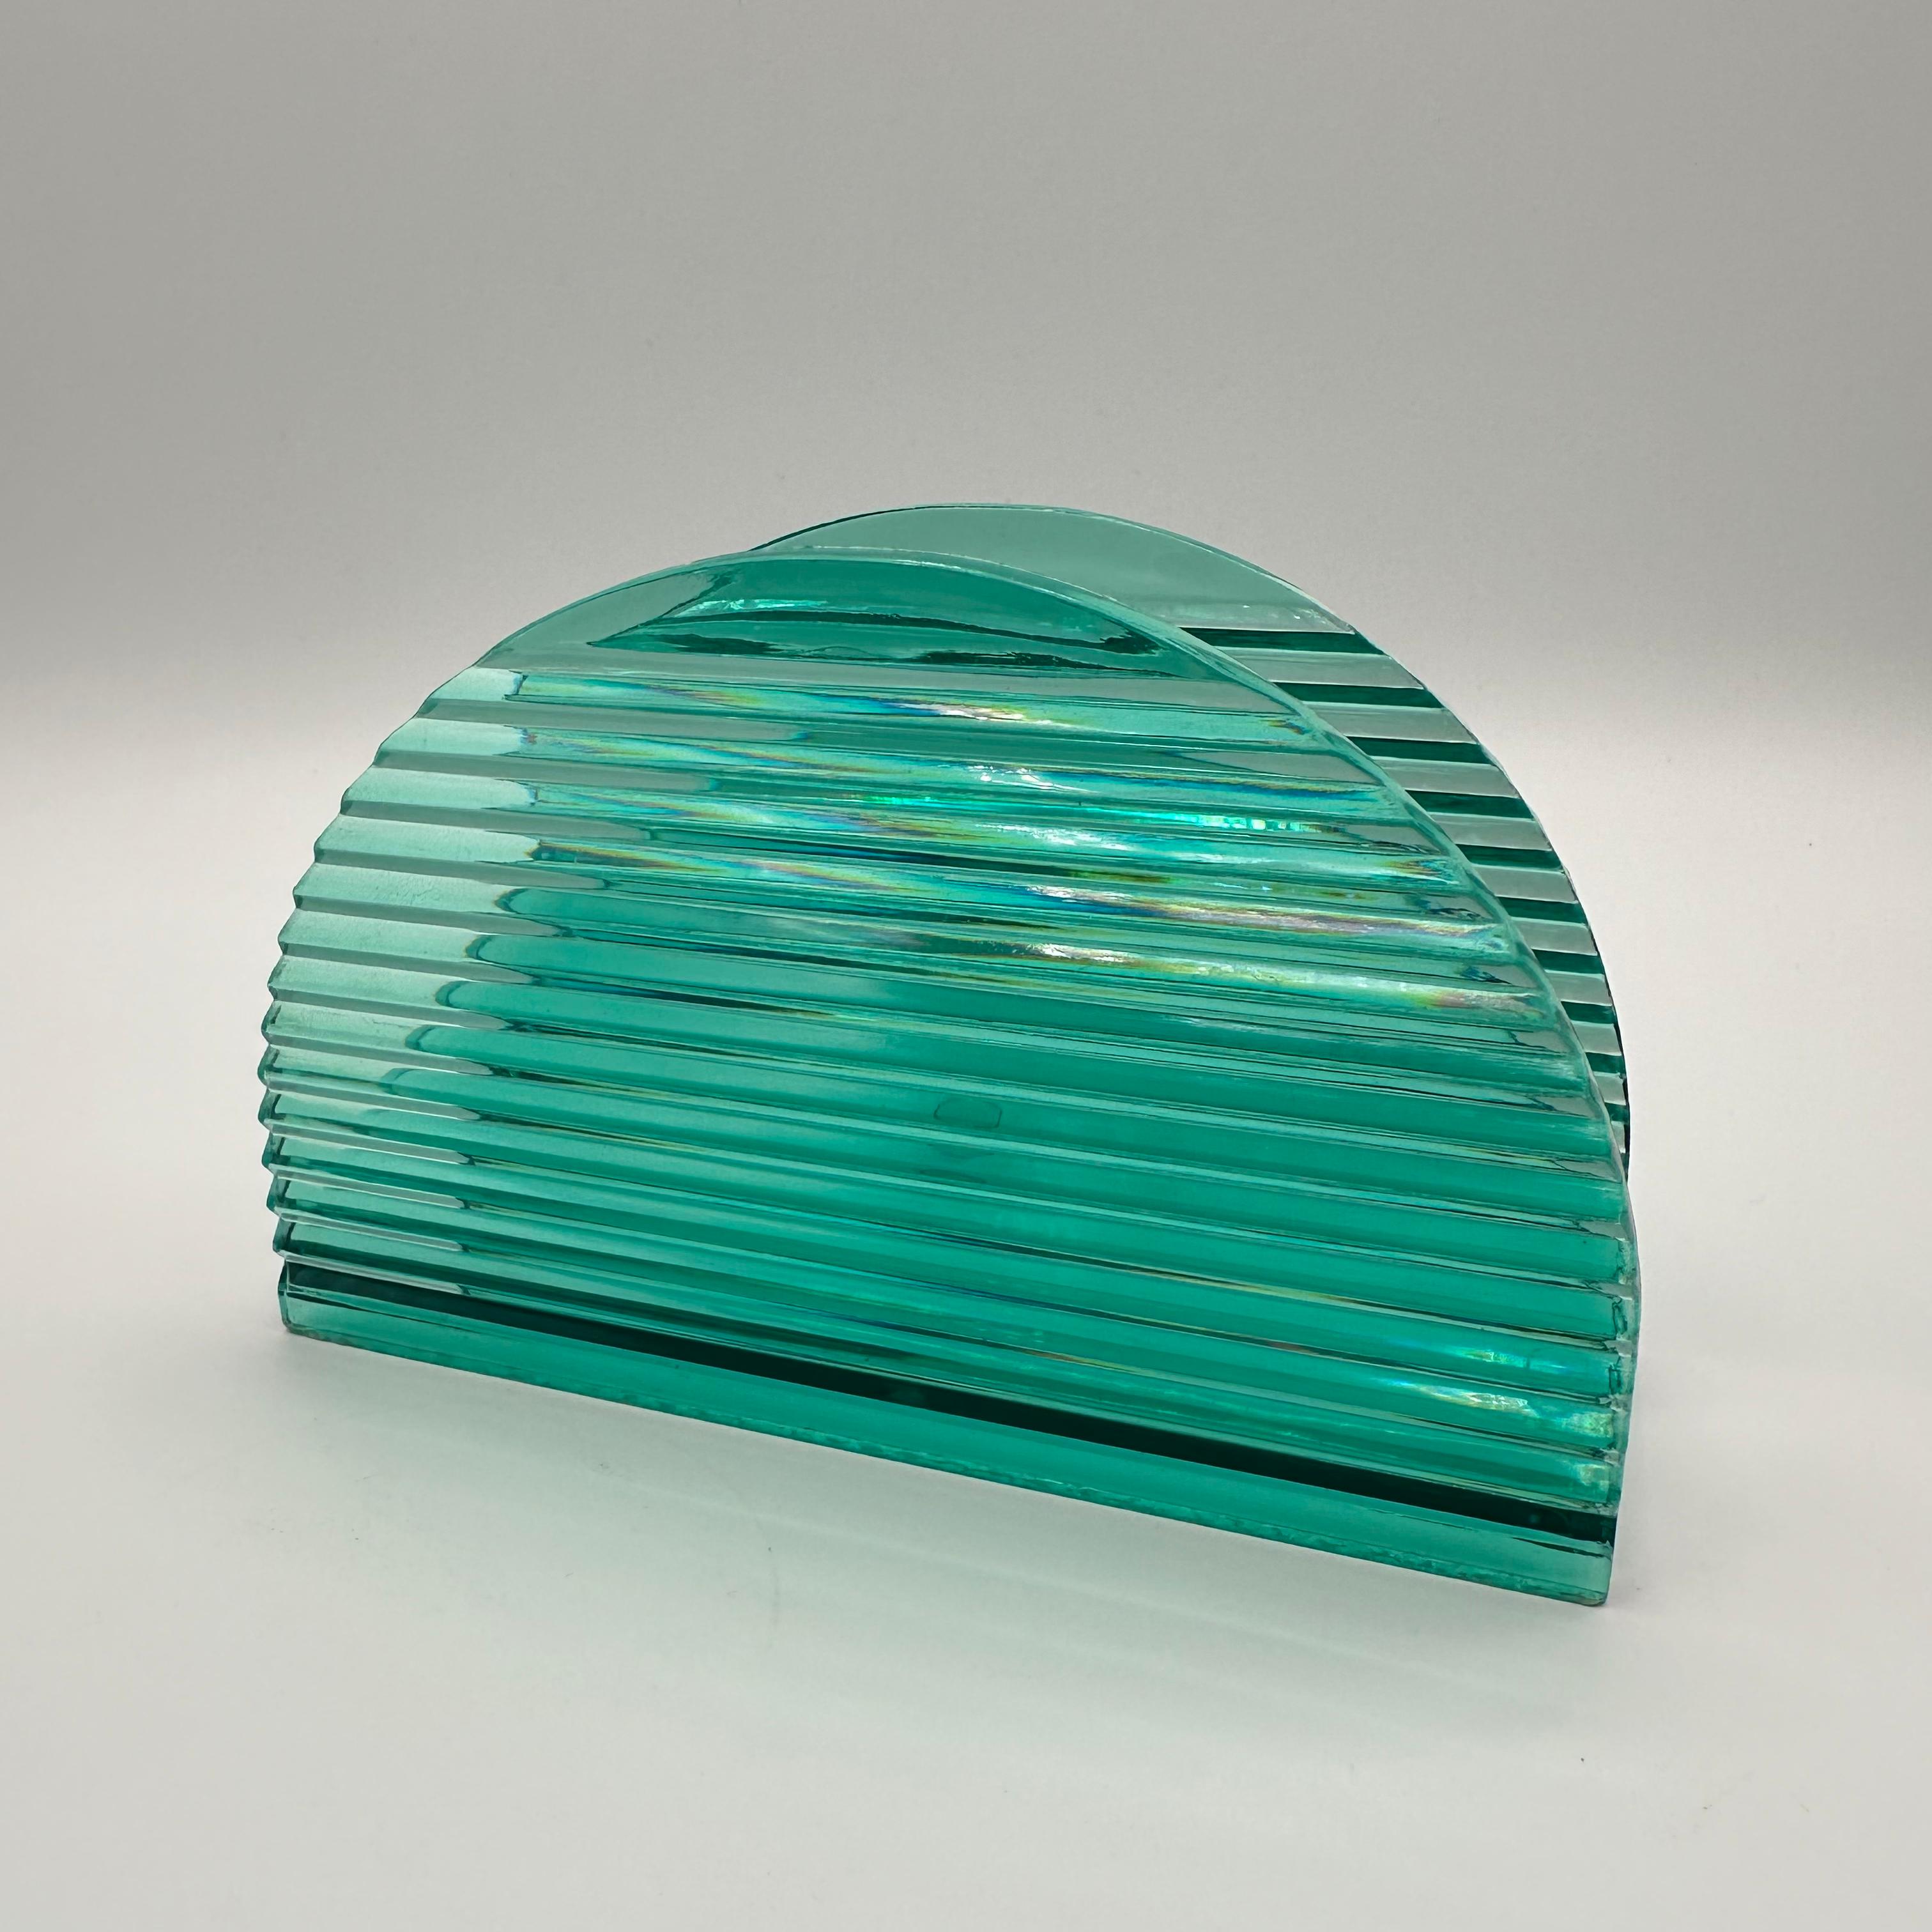 A vintage post modern napkin holder in a teal or aqua bluegreen color. With a dome or half moon shape, along with a pyramidal fluted horizontal rib detail. 